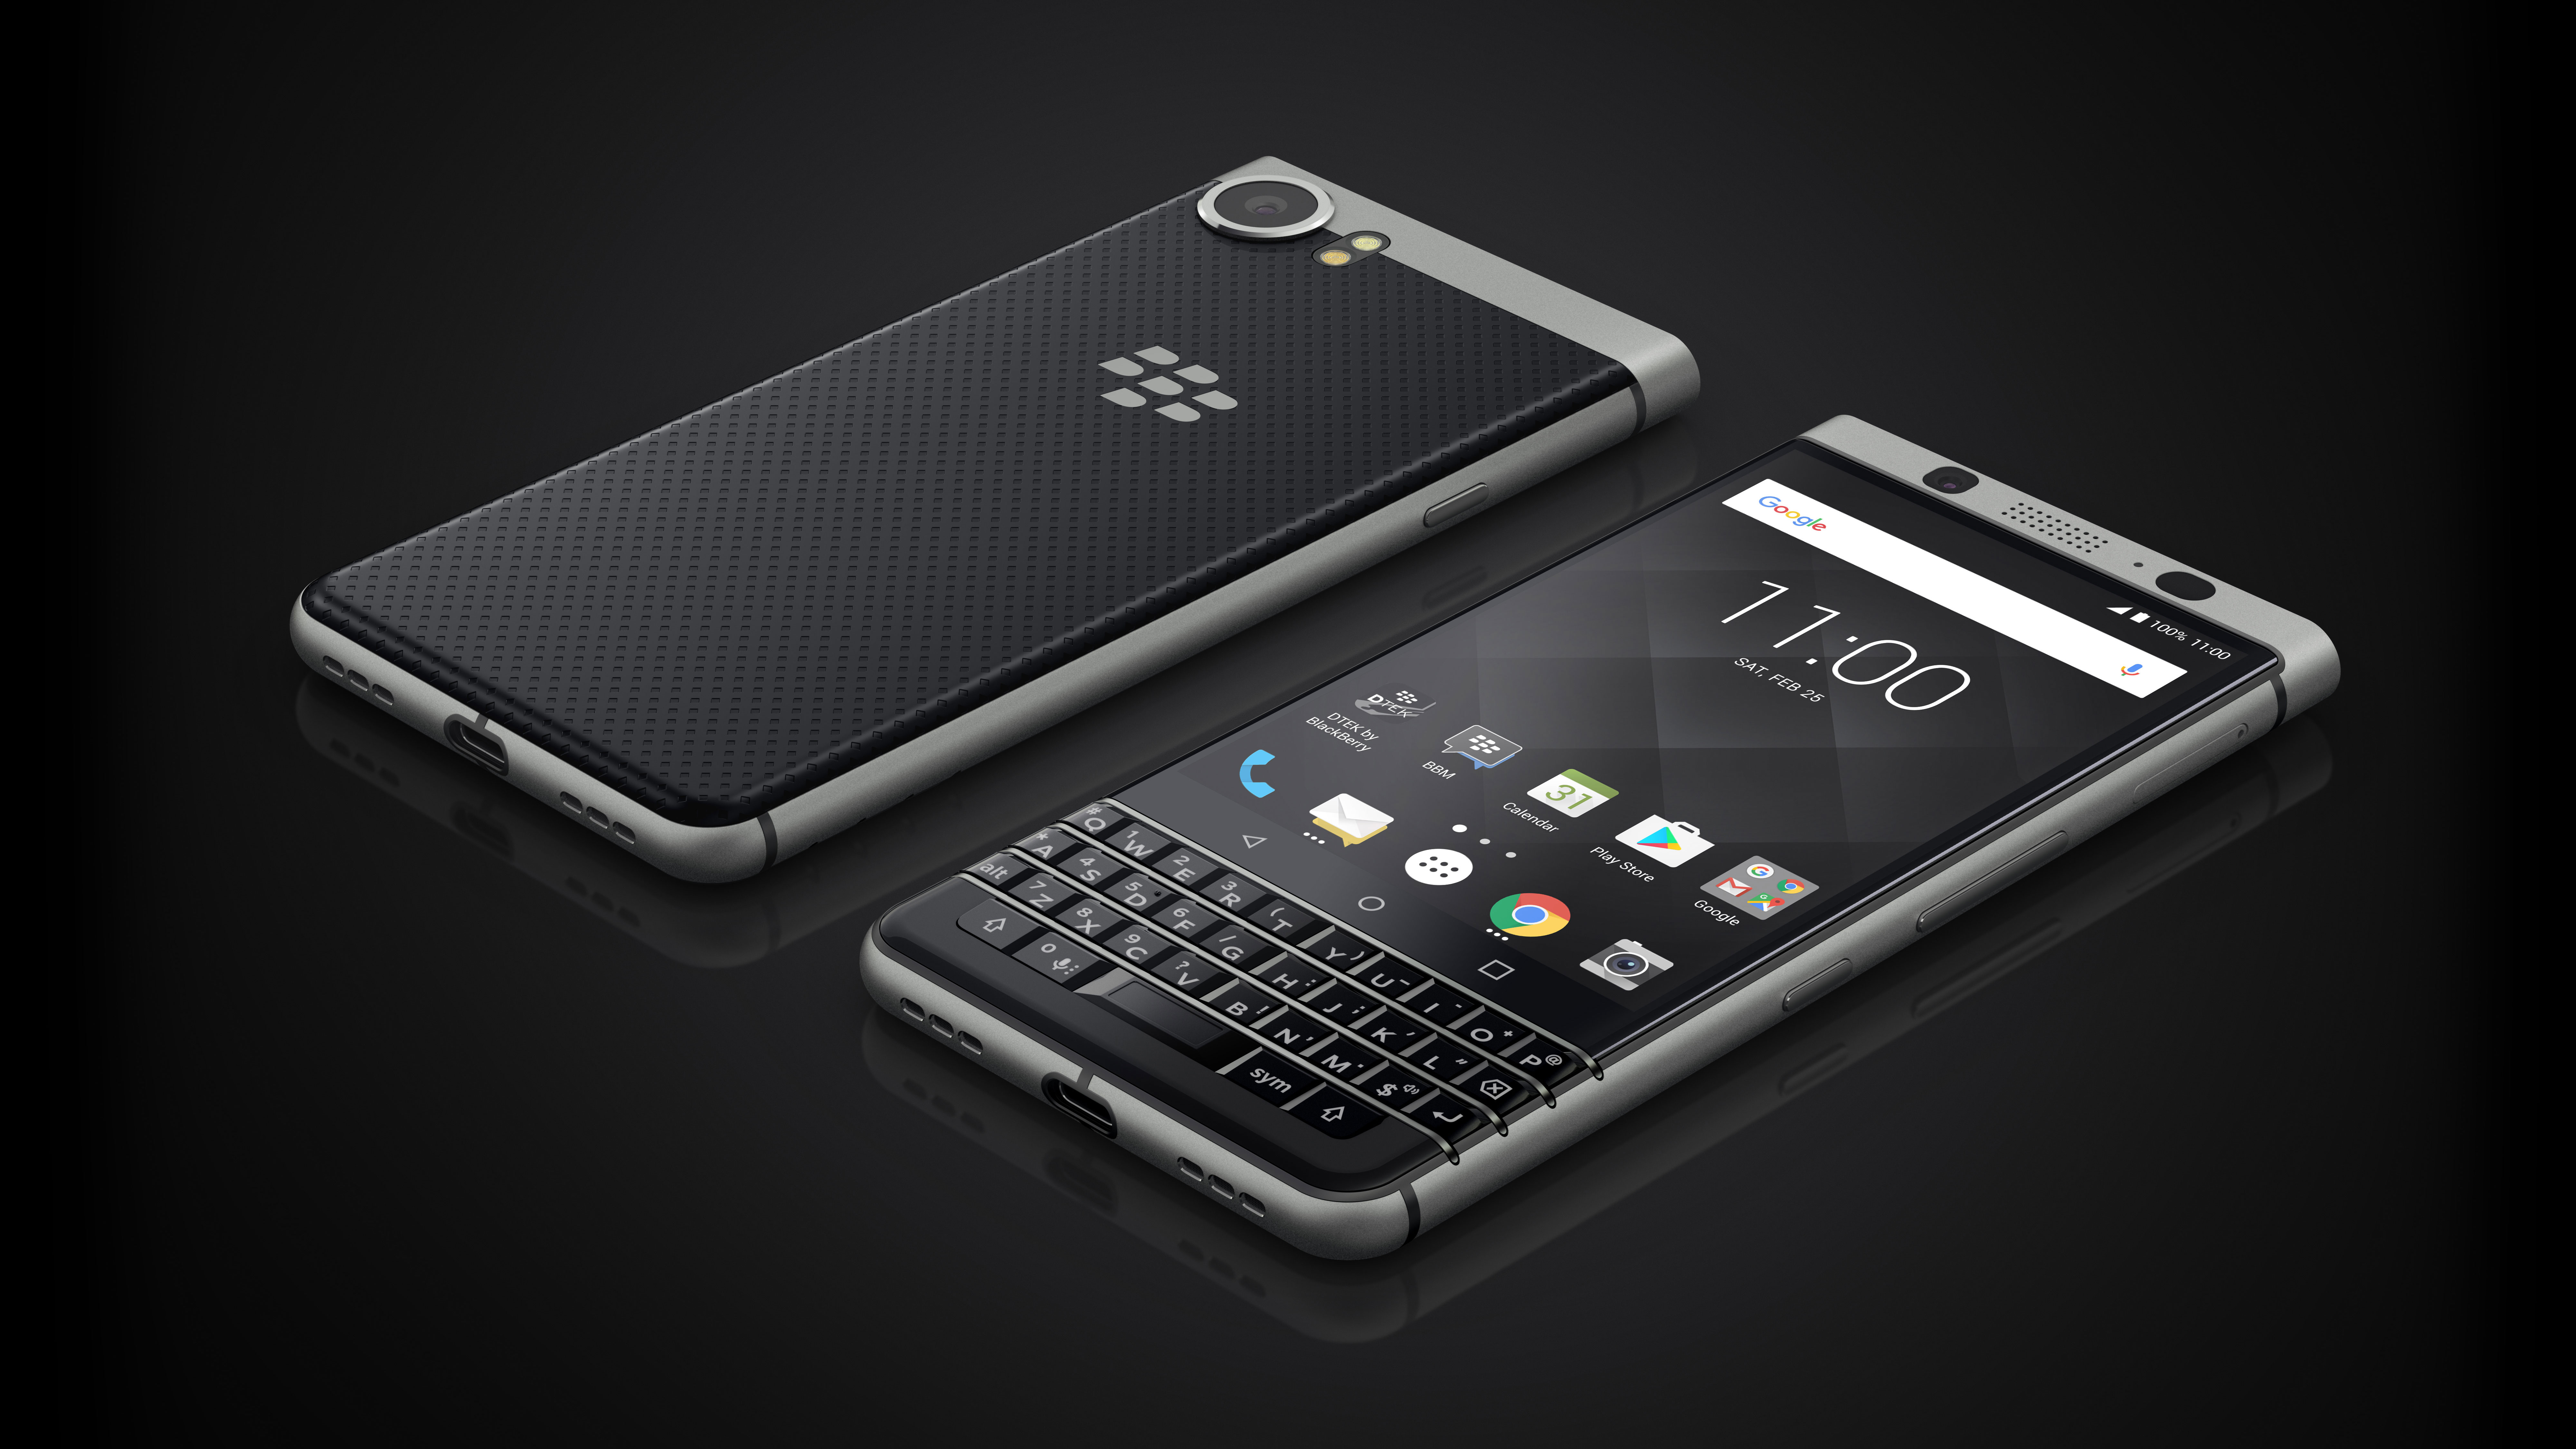 A new BlackBerry phone with no keyboard is on the way soon TechRadar